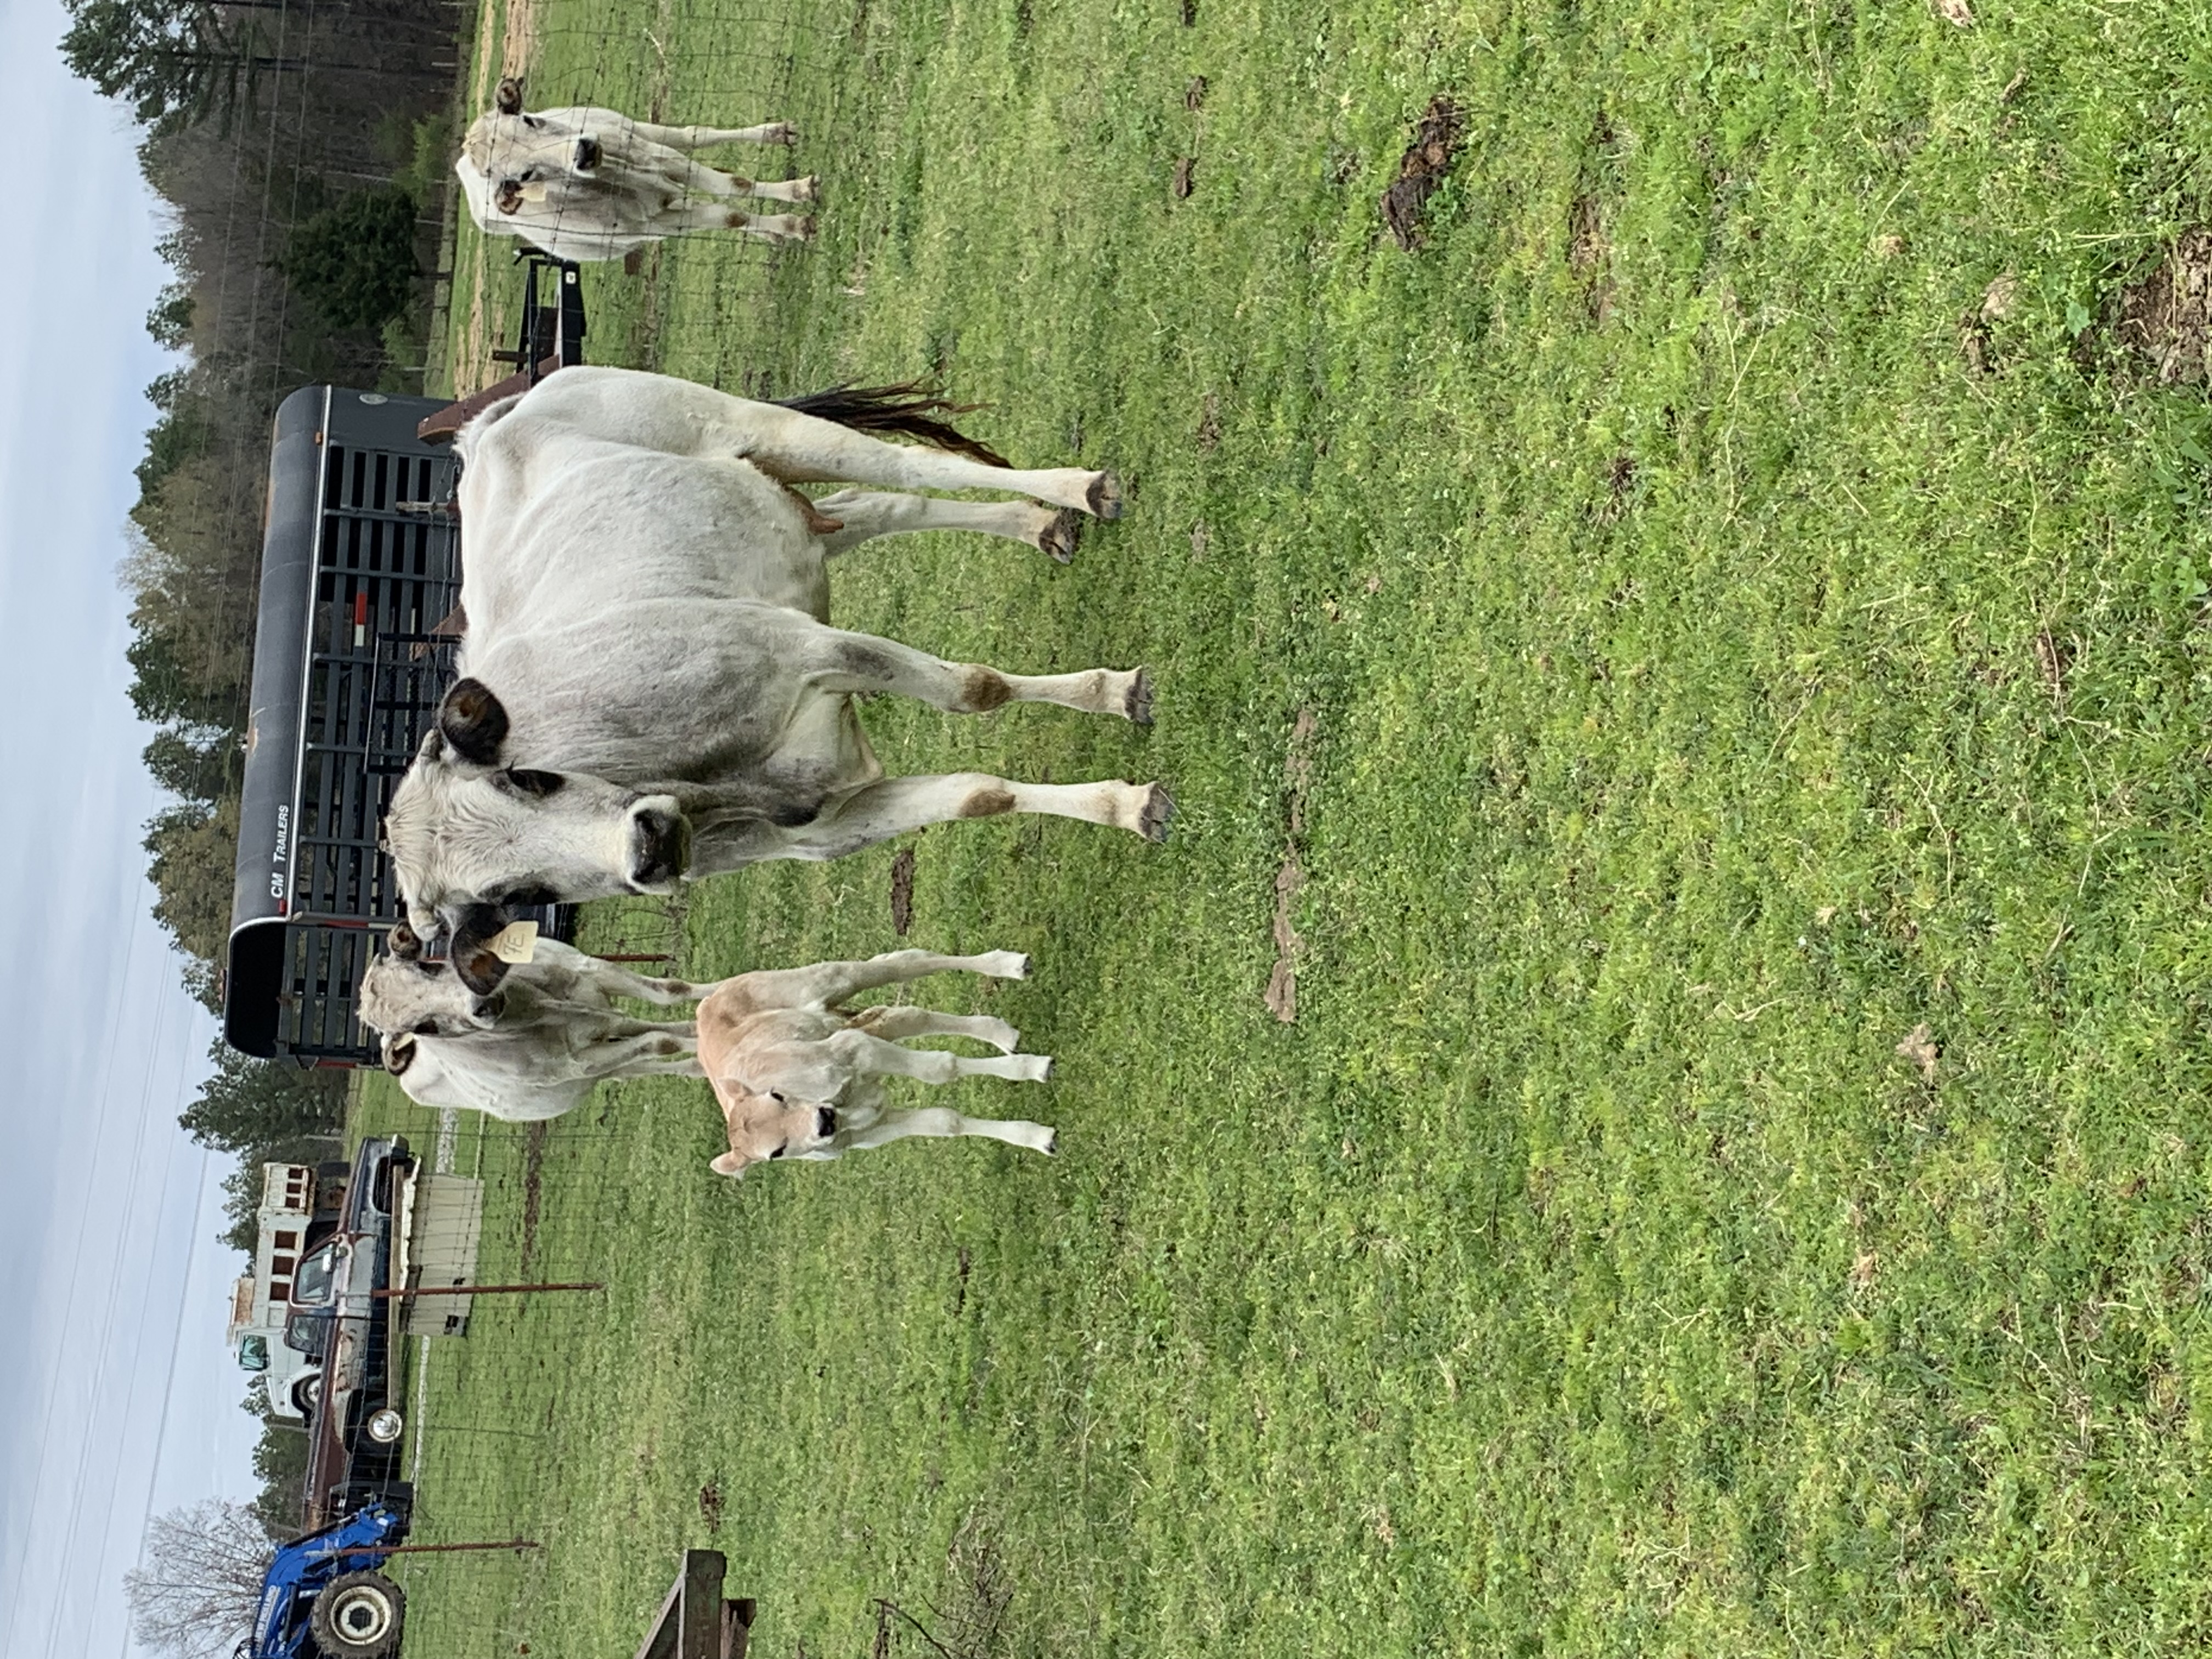 Bull, Cows, pairs and heifers for sale